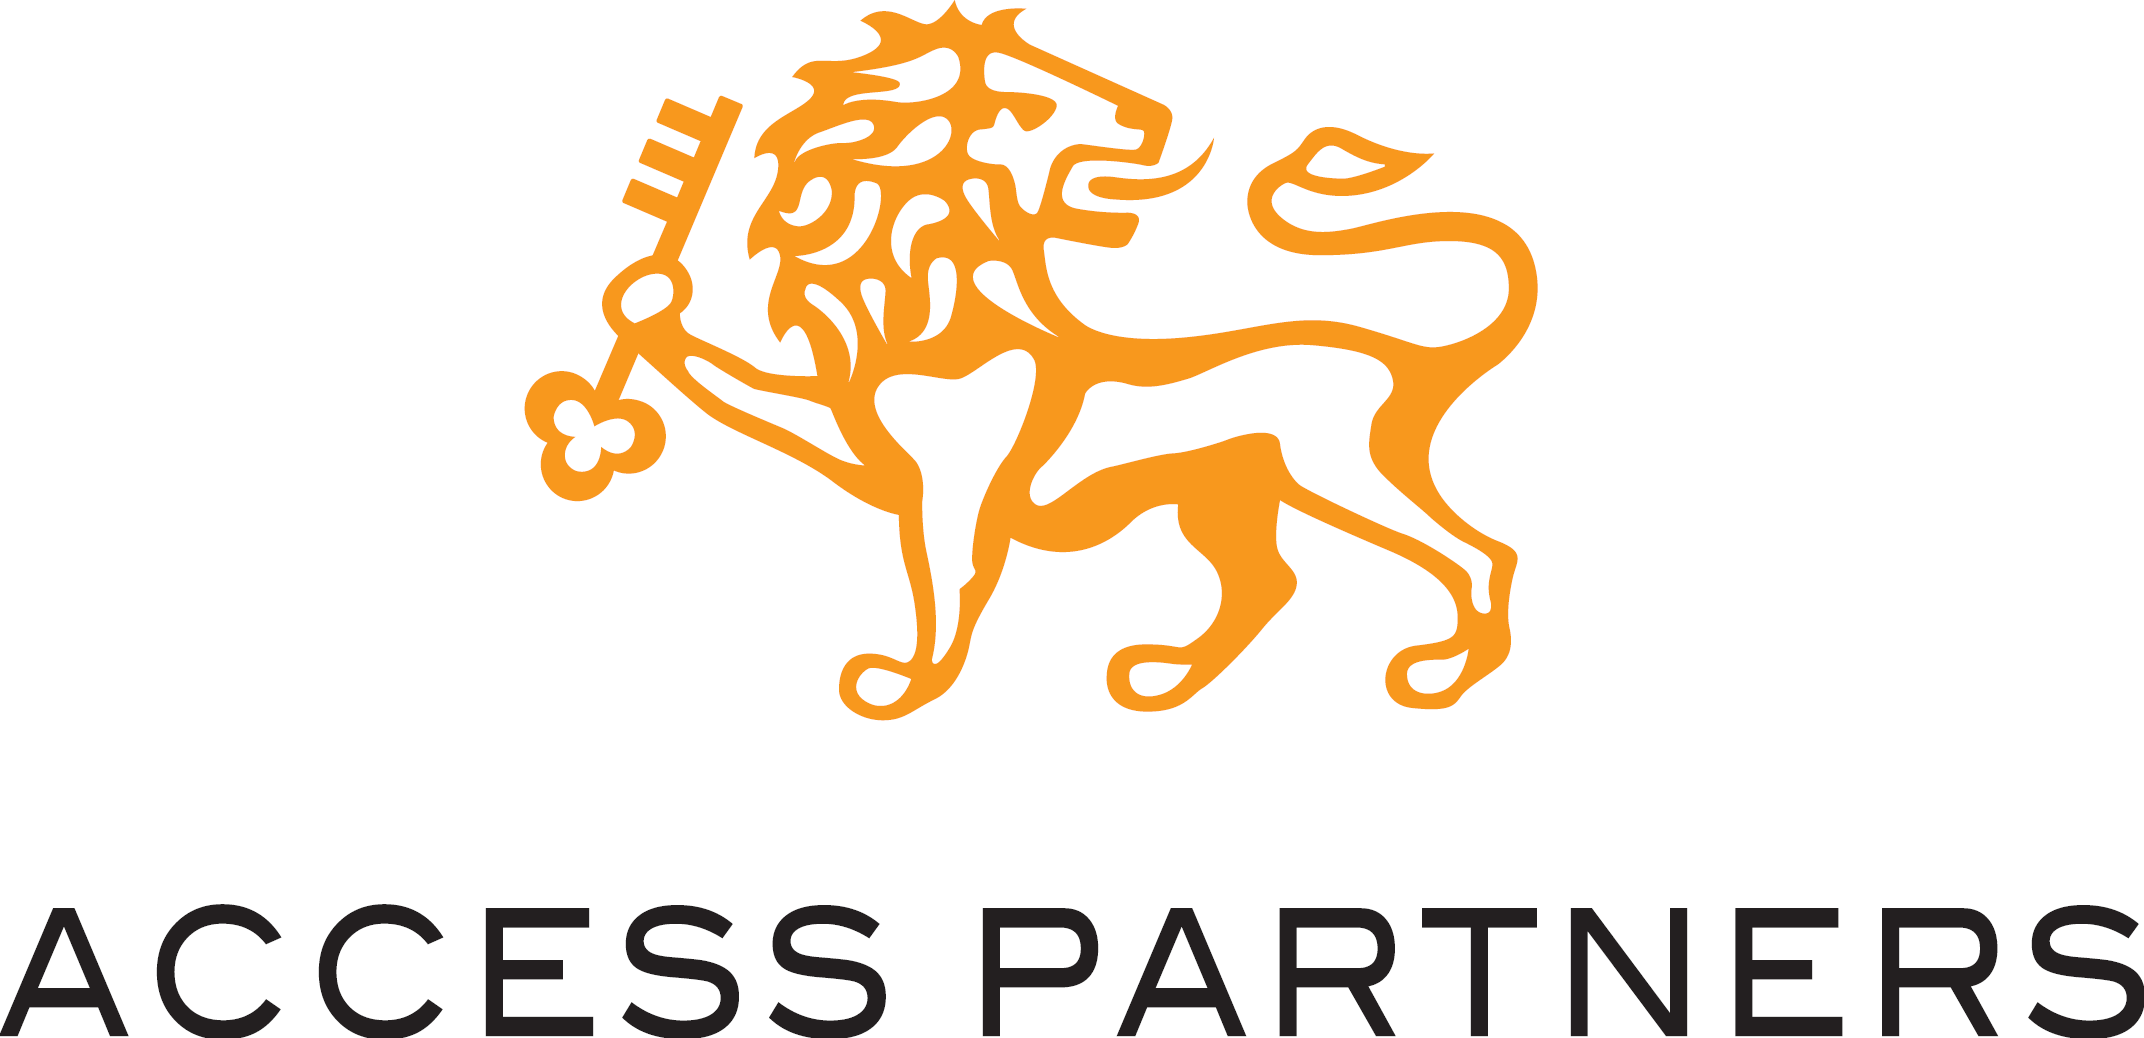 Access Partners Oy